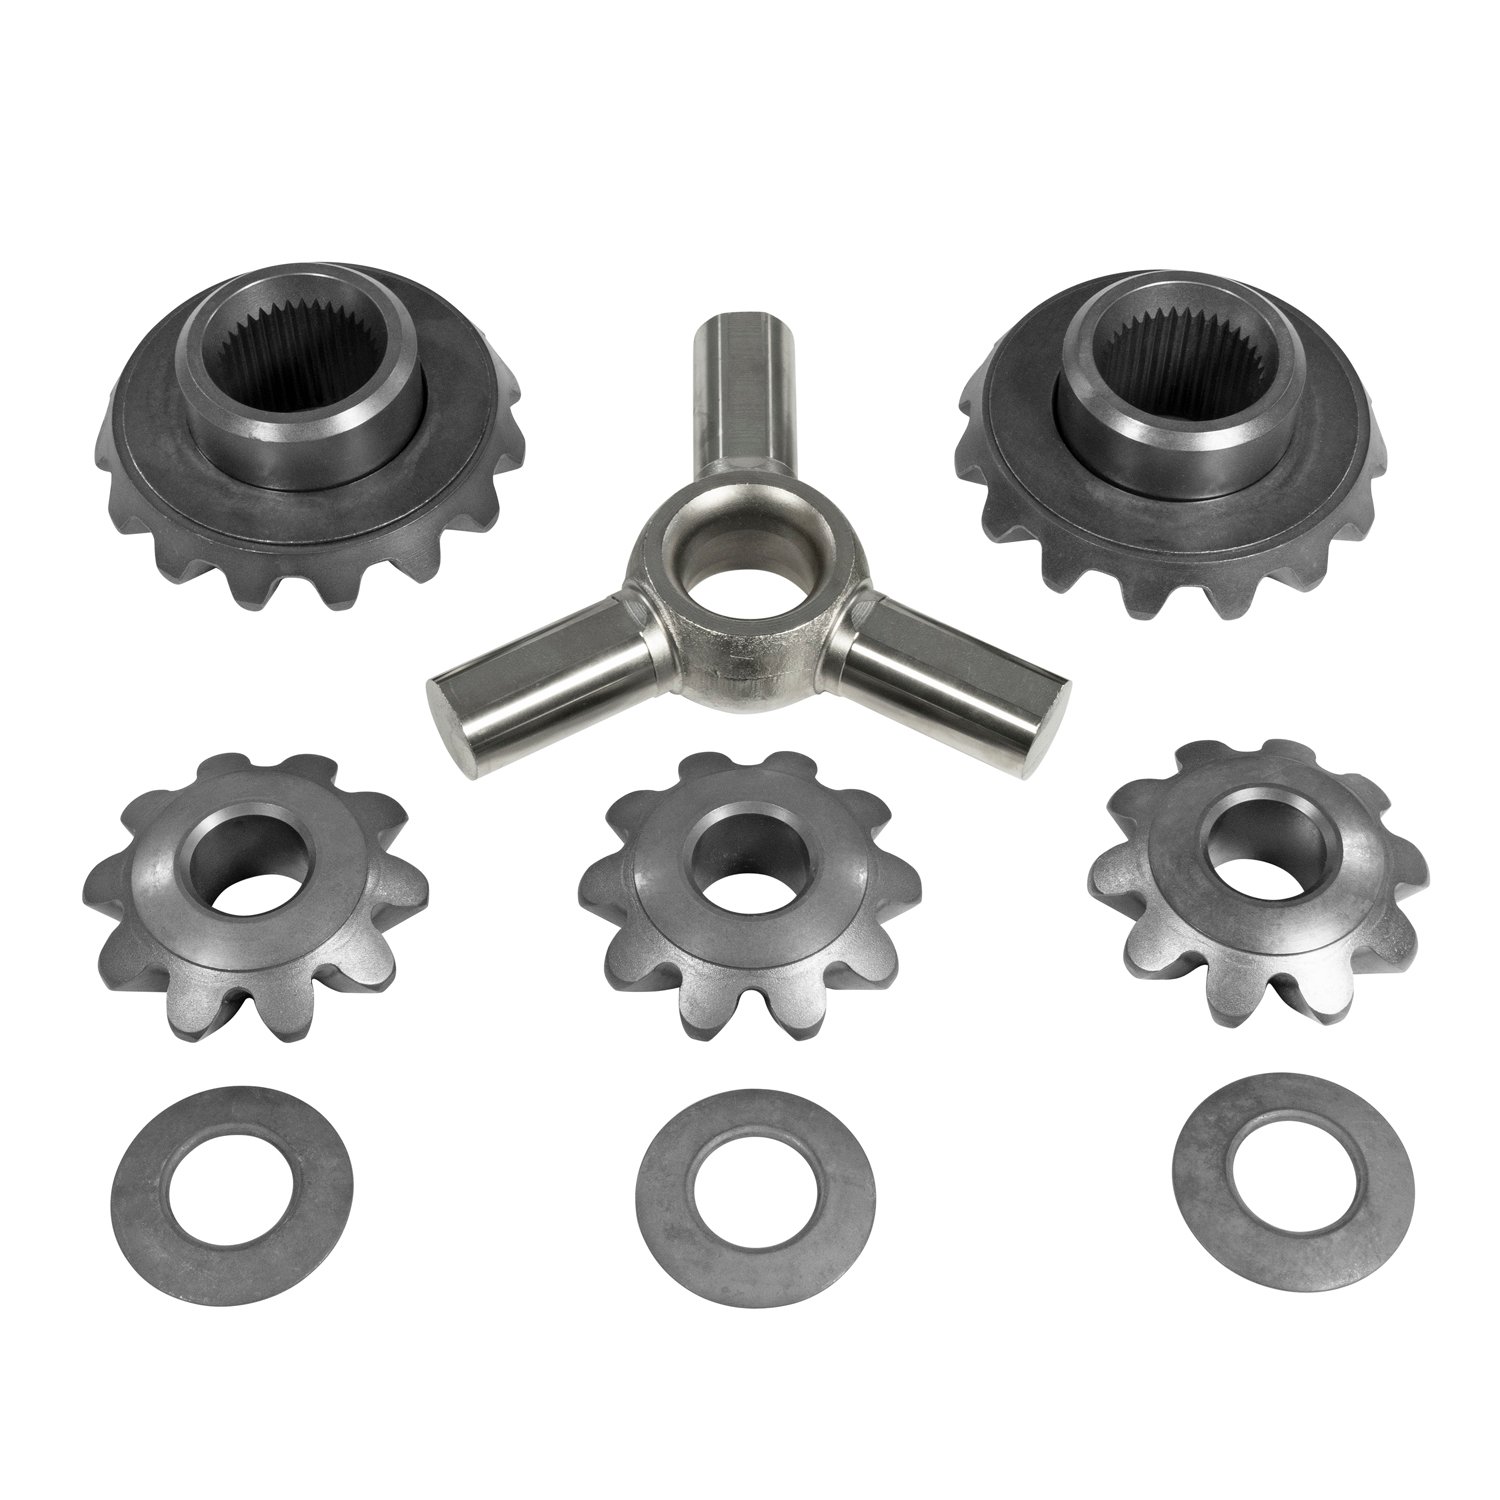 Spider Gear Kit For Ford 10.5 in. With 35 Spline, 3 Pinion